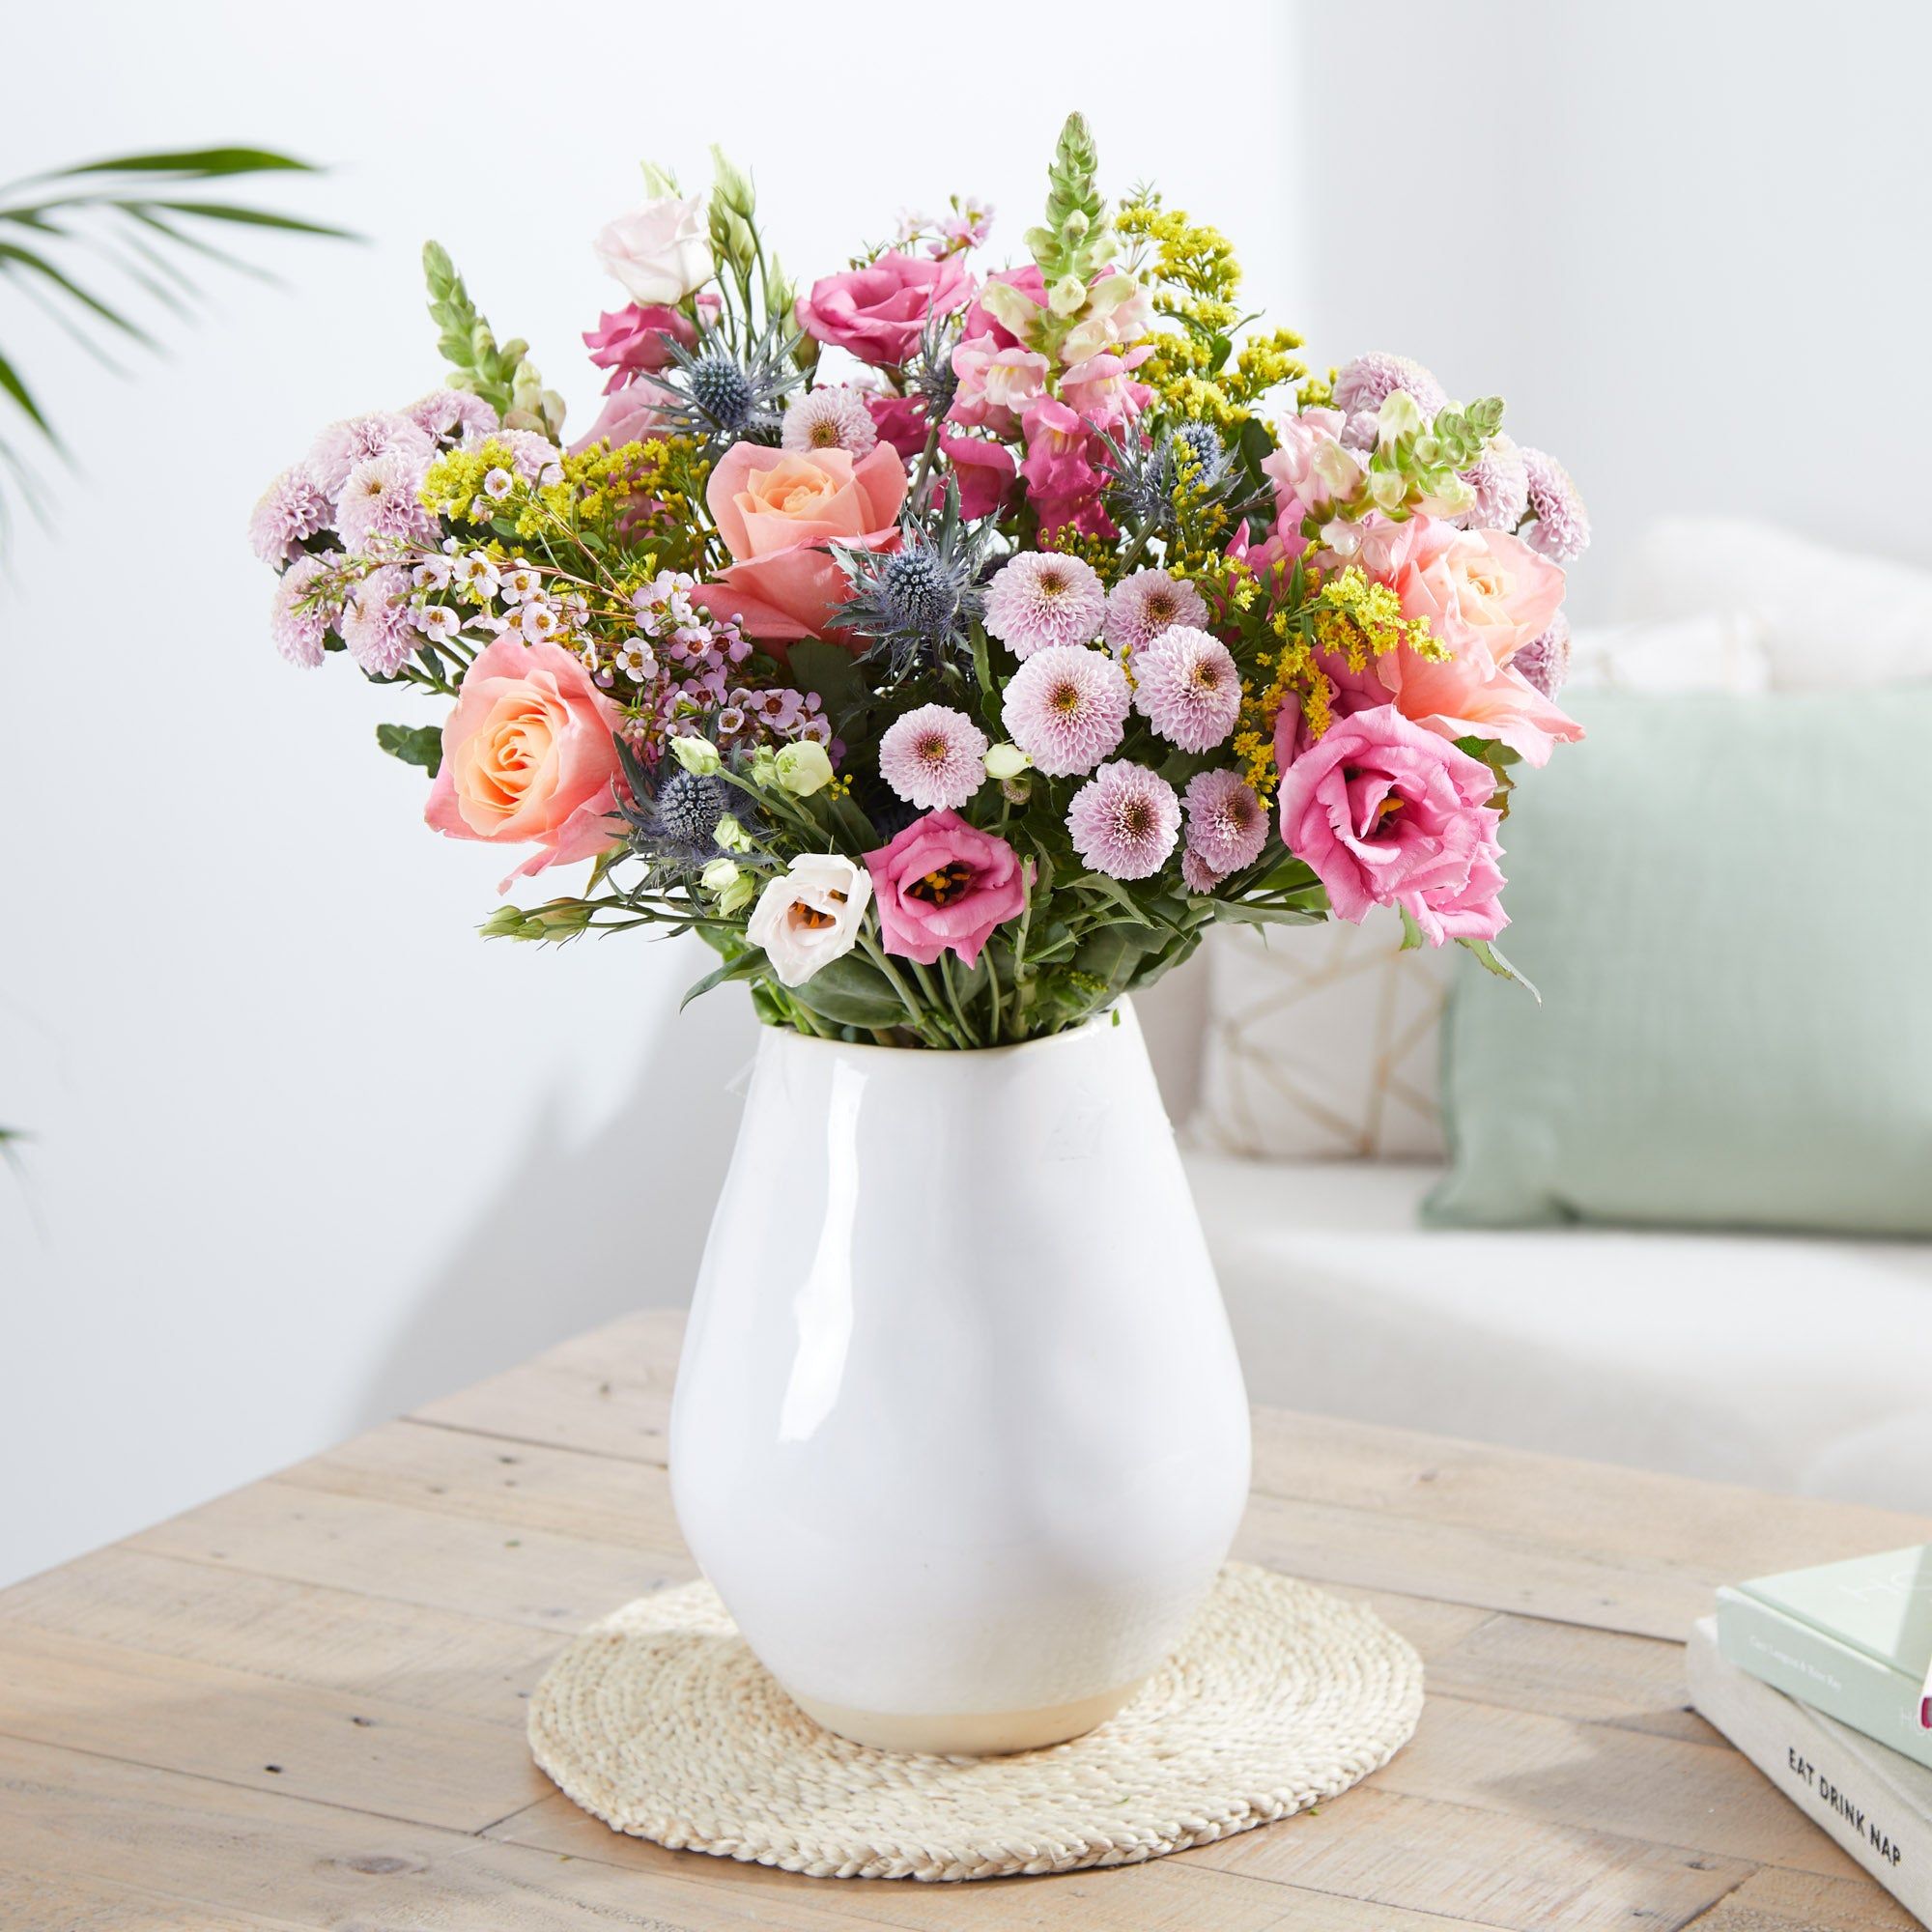 Send our 'Sweet Harmony' bouquet | Arena Flowers